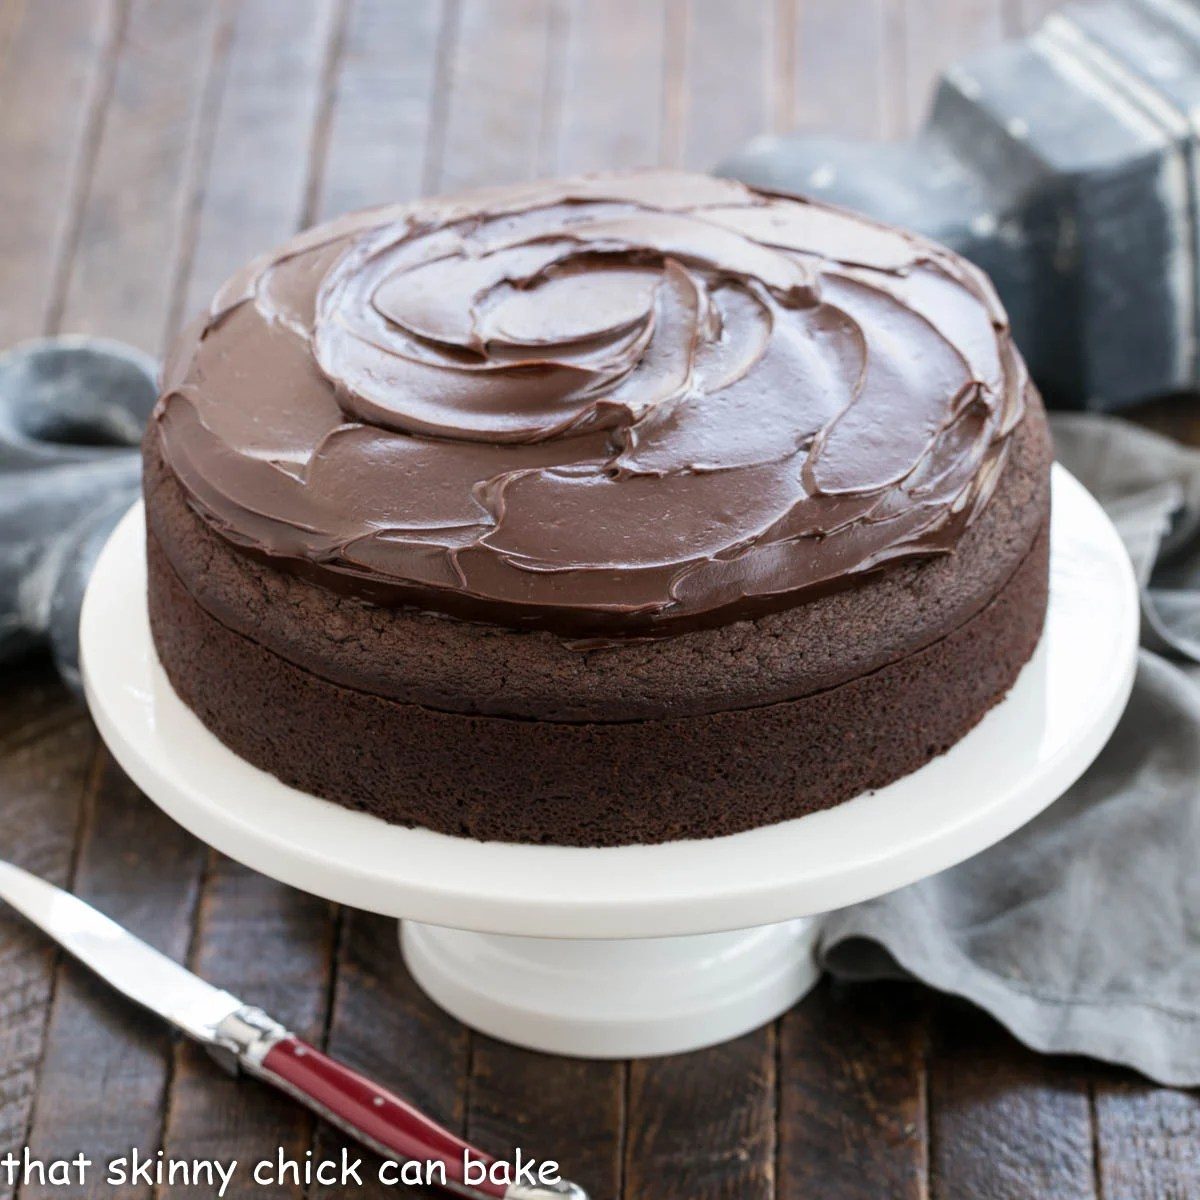 Simple Chocolate Cake Recipe - With Ganache! - That Skinny Chick Can Bake